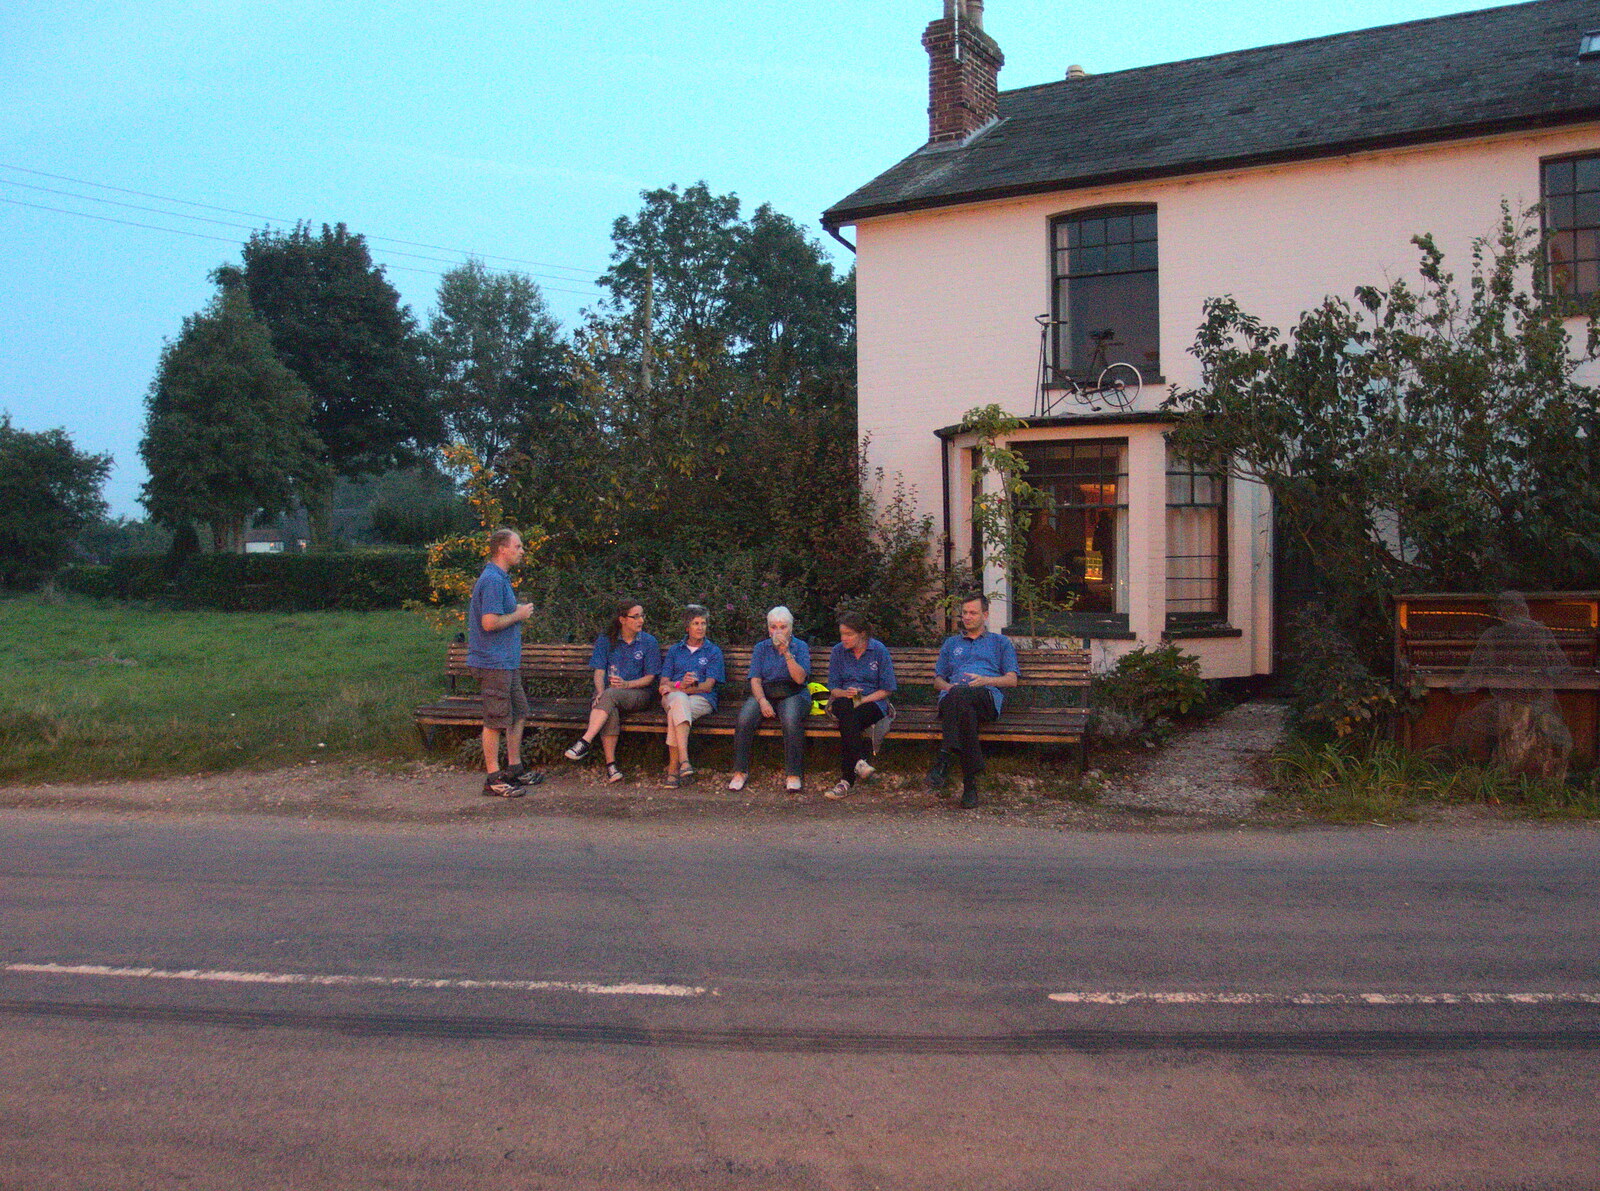 BSCC on the bench from Bike Rides and the BSCC at the Railway, Mellis and Brome, Suffolk - 18th September 2014